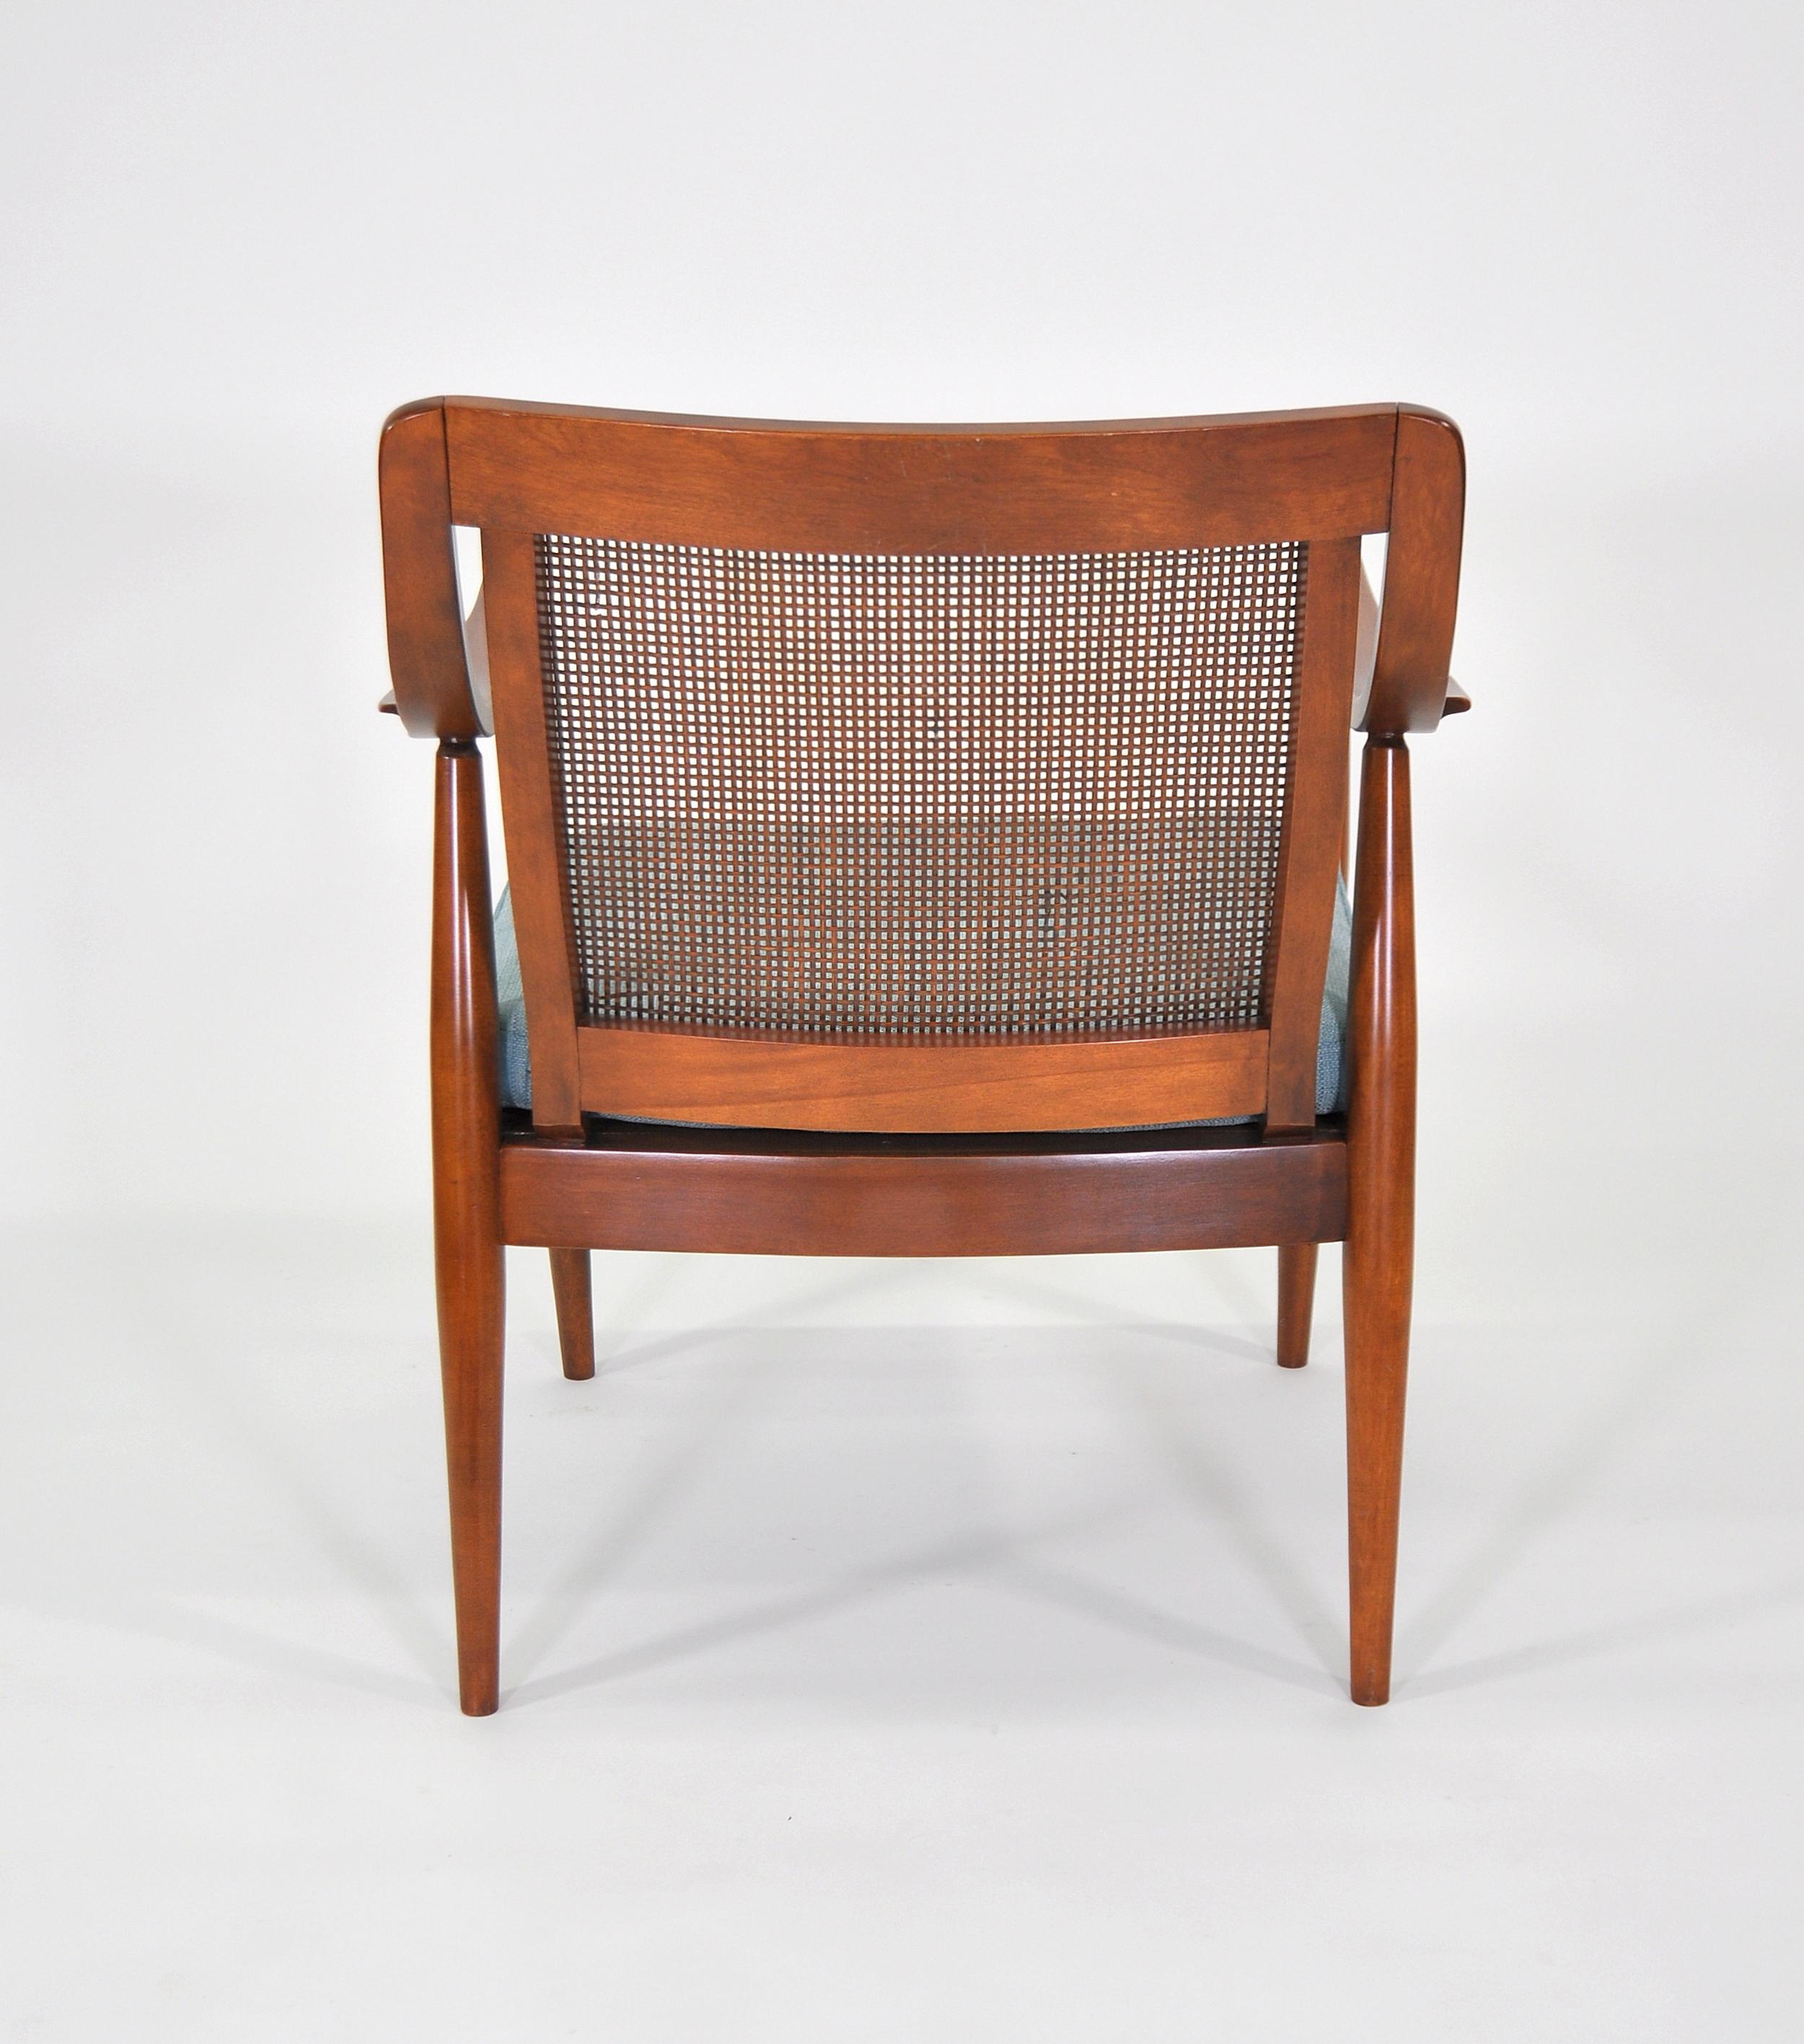 Mid-20th Century Peter Hvidt Style Walnut and Cane Lounge Chair